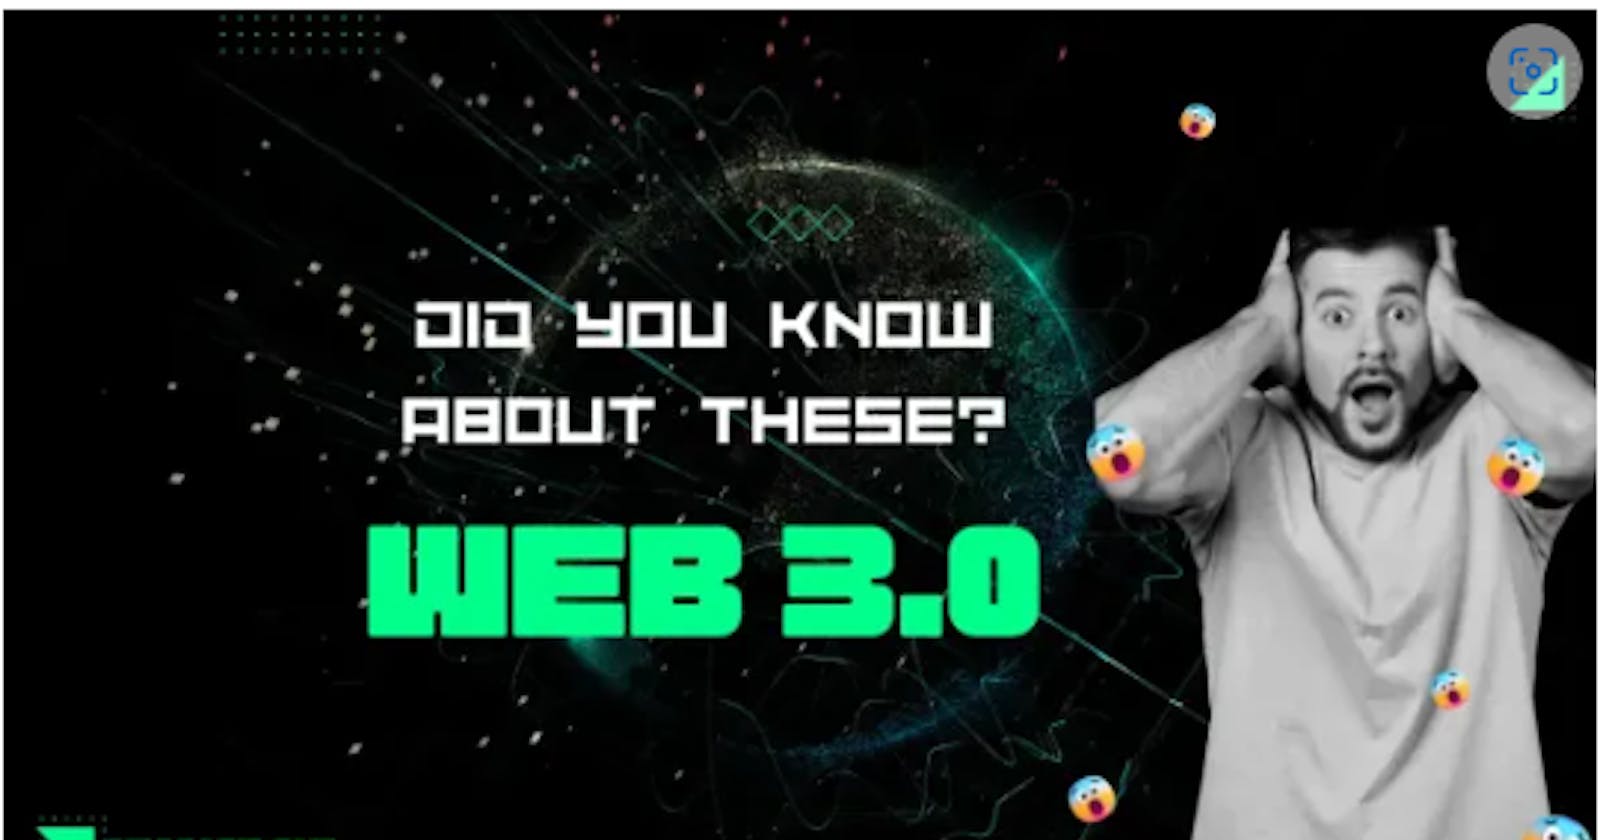 Did you know about these benefits of Web3?